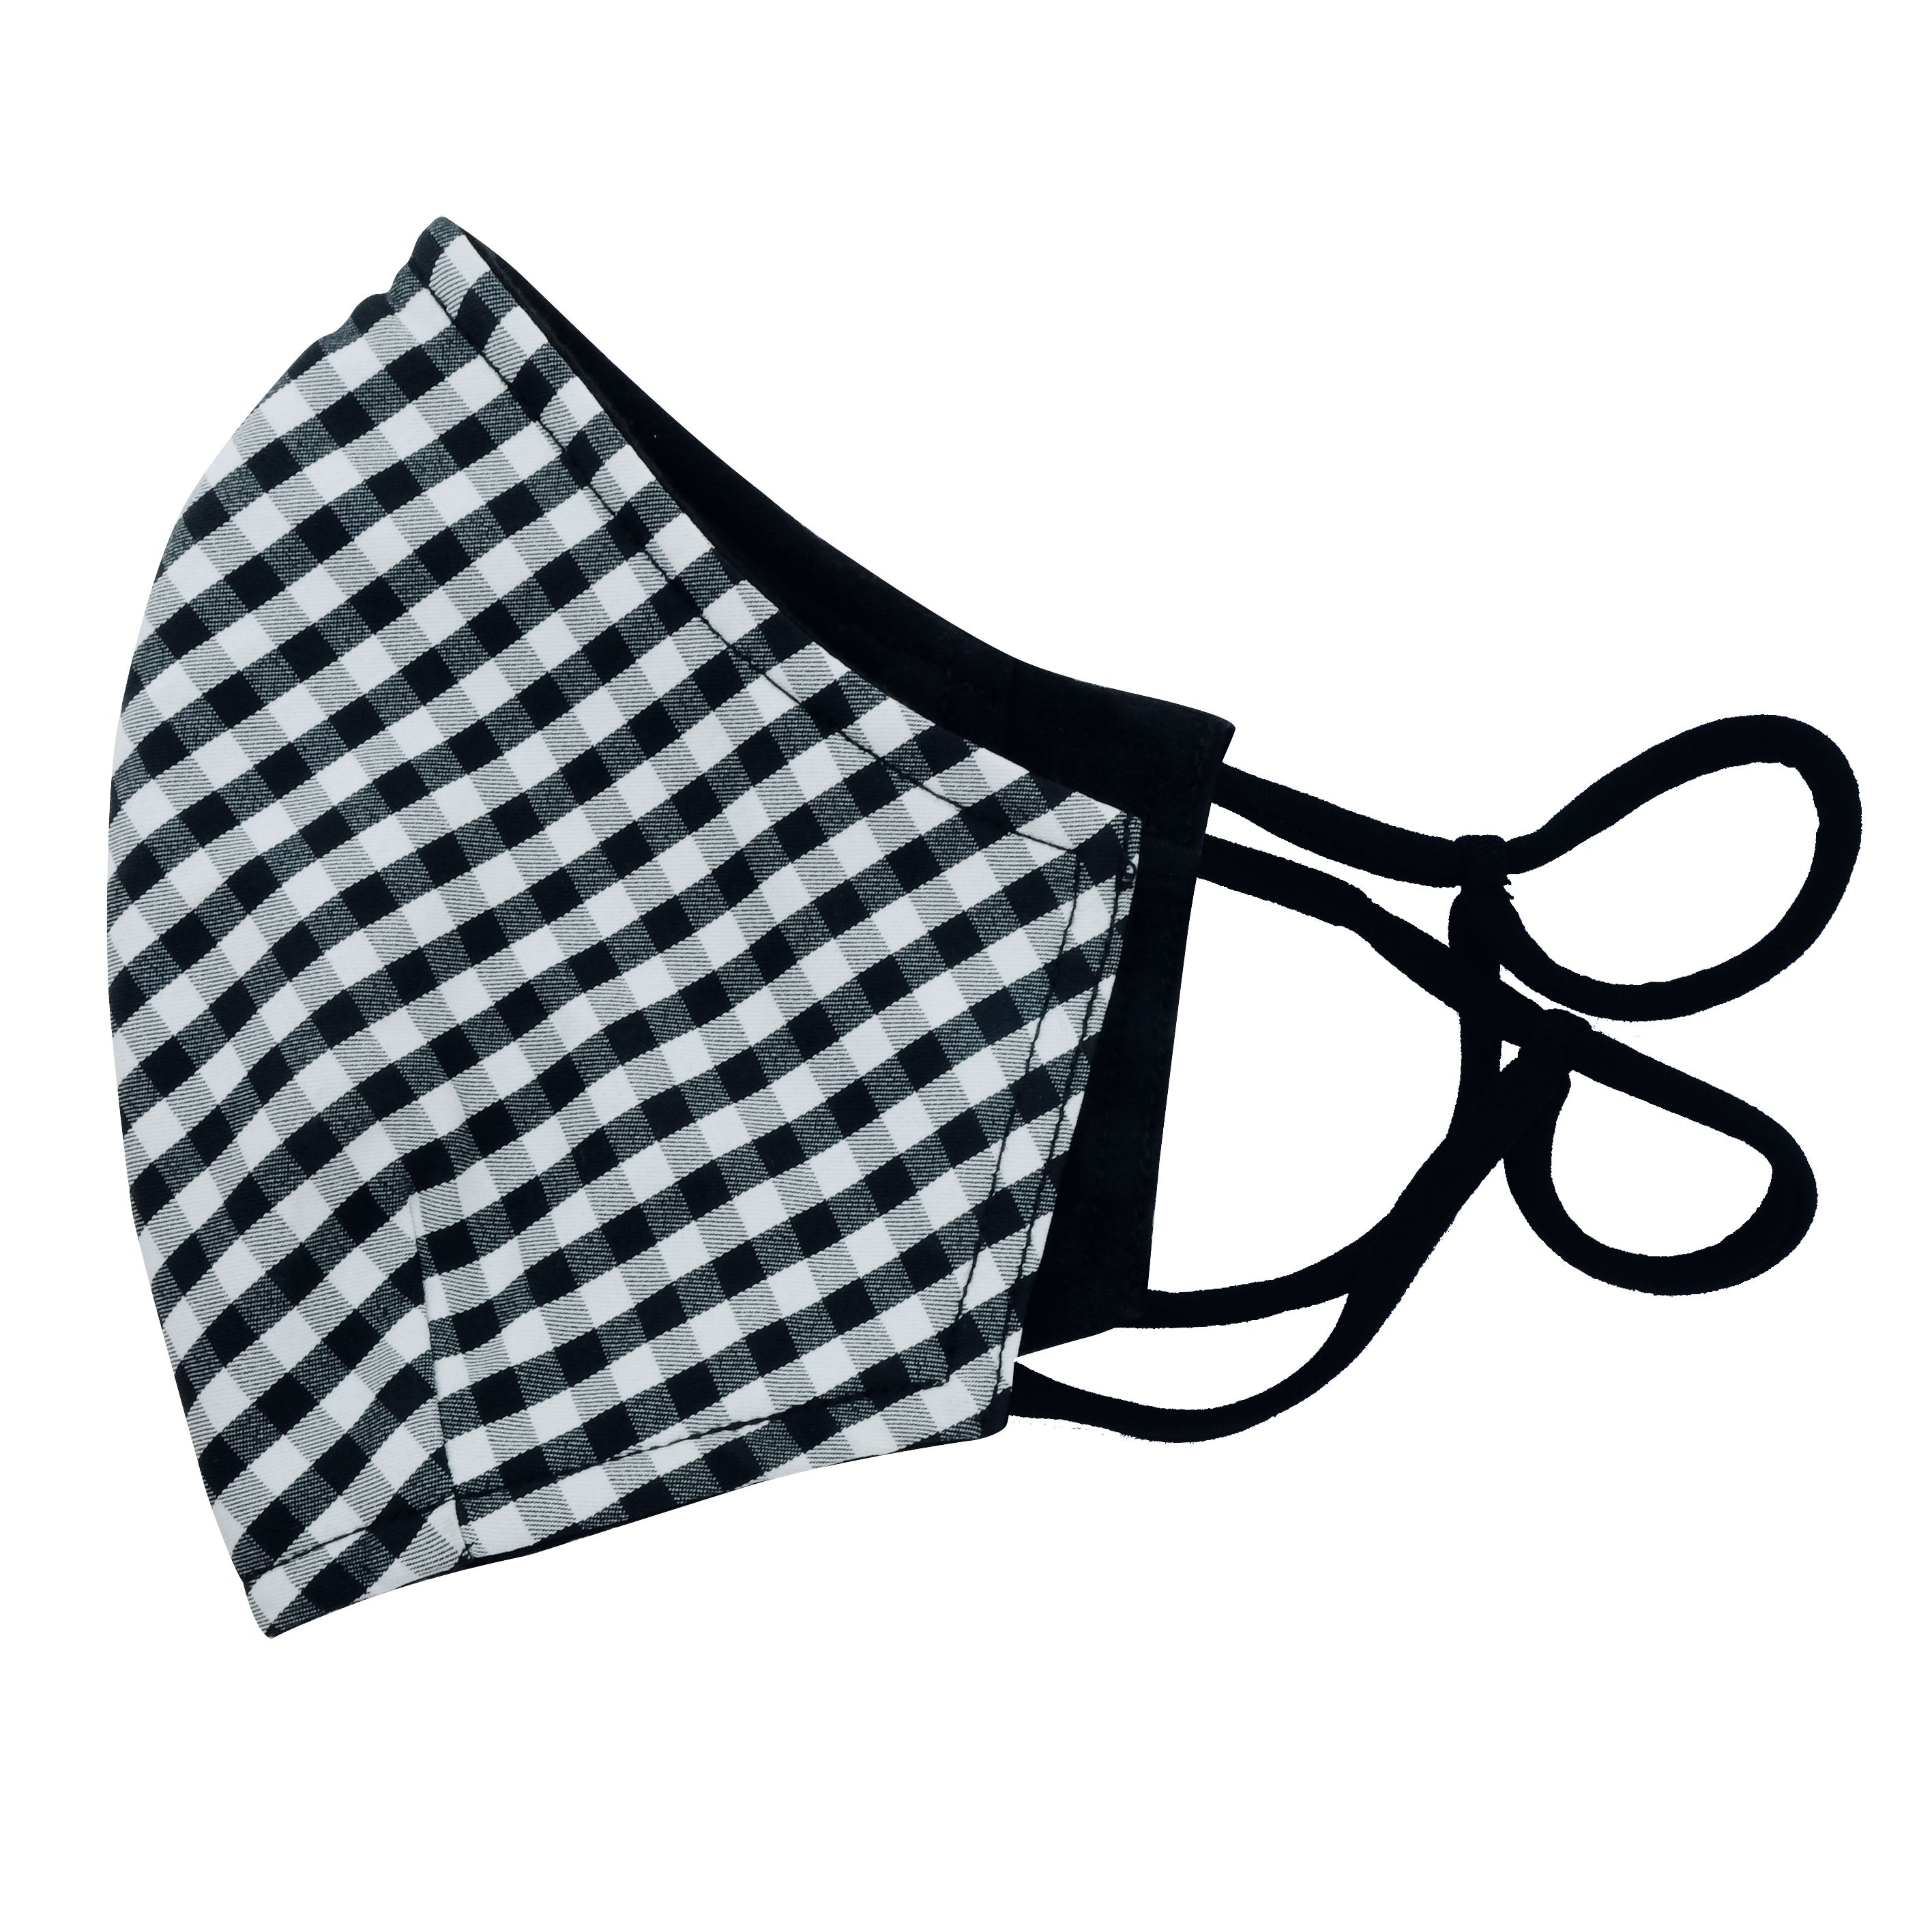 The Premium Reusable Face Mask in Gingham Black